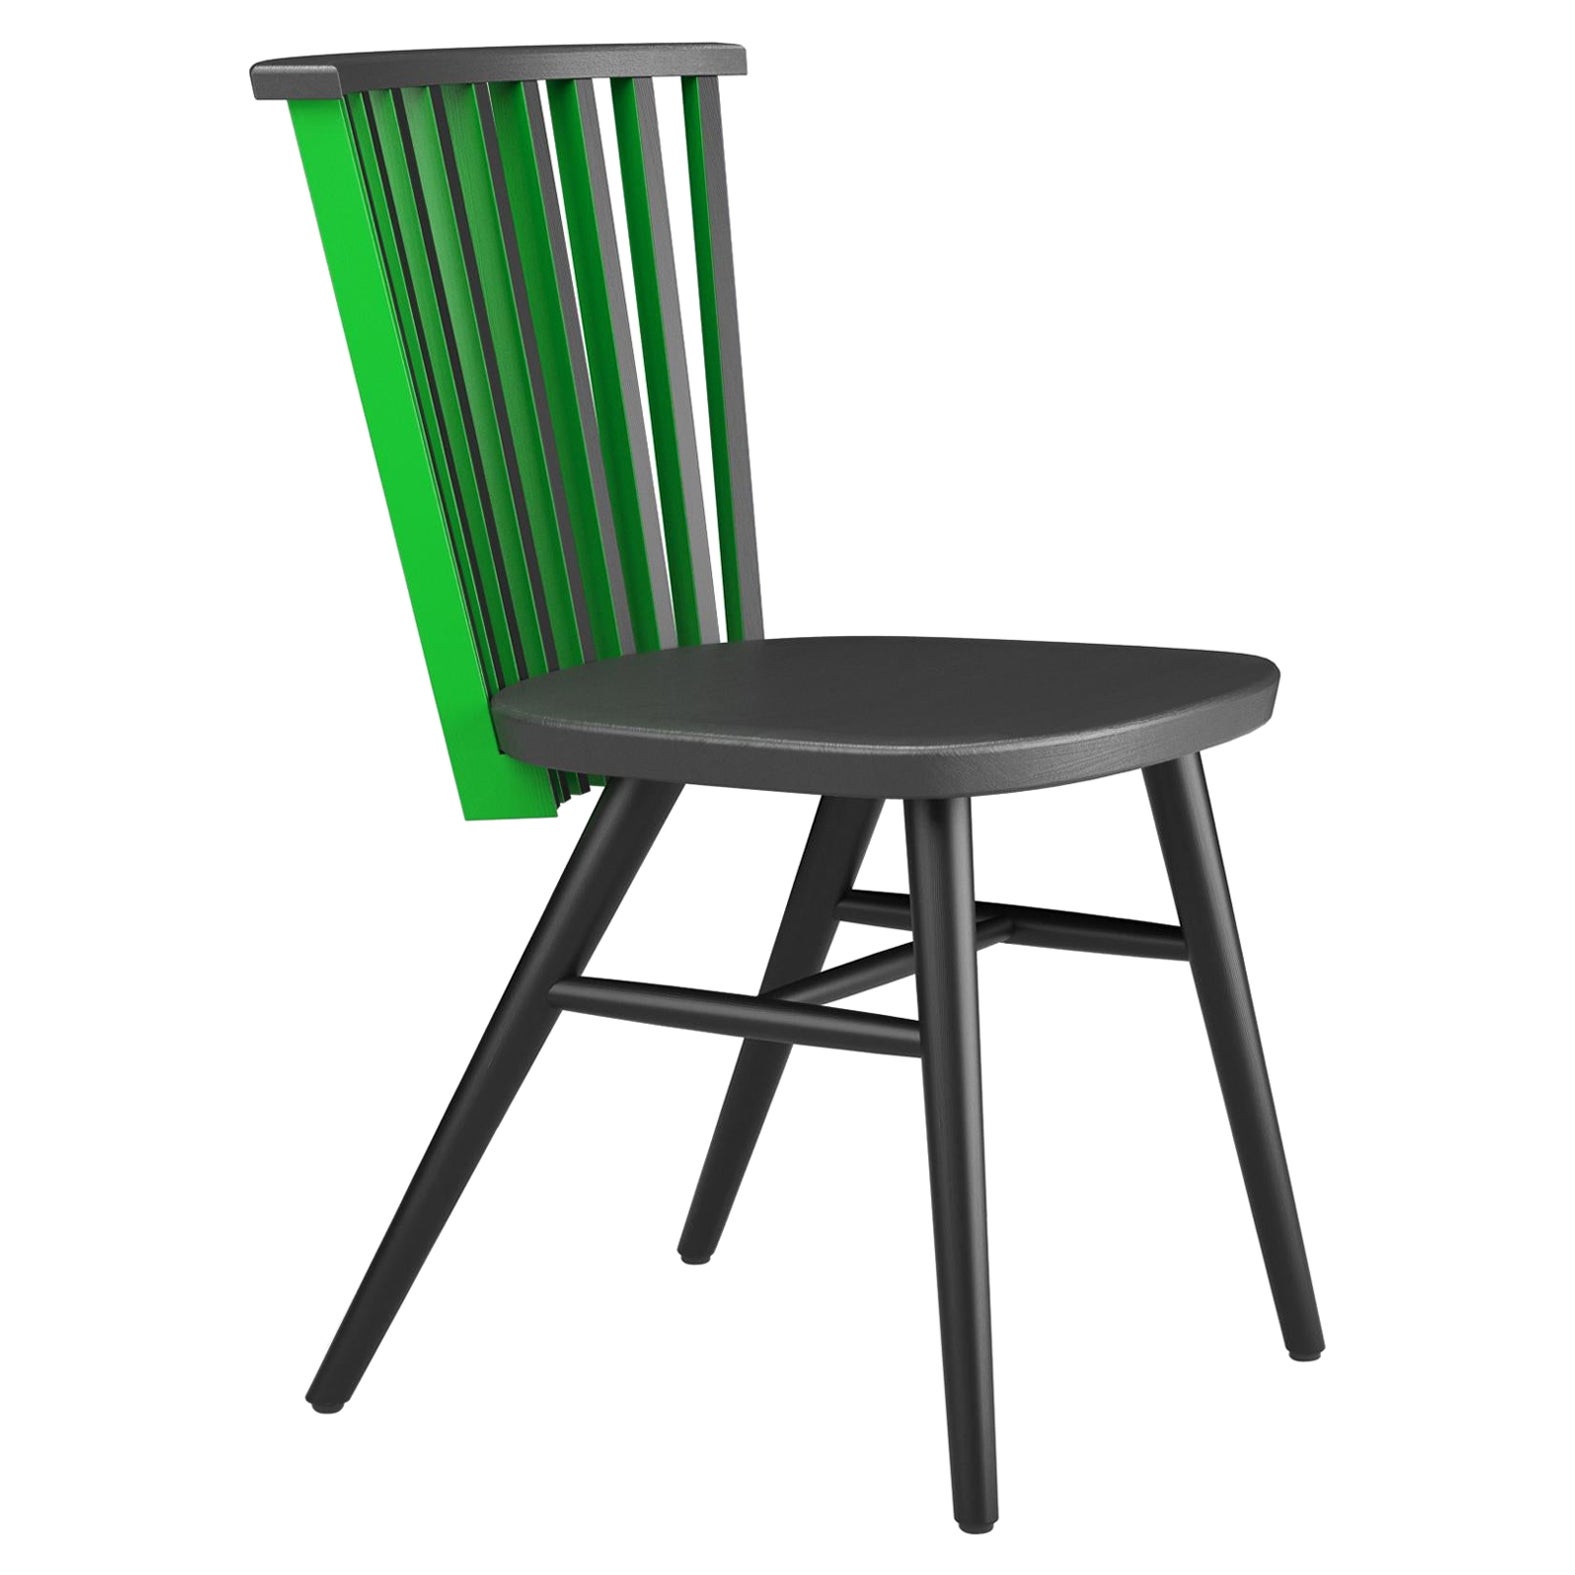 Hayche, Tornasol chair, Black, Green & Blue, Solid Wood, UK, Made To Order For Sale